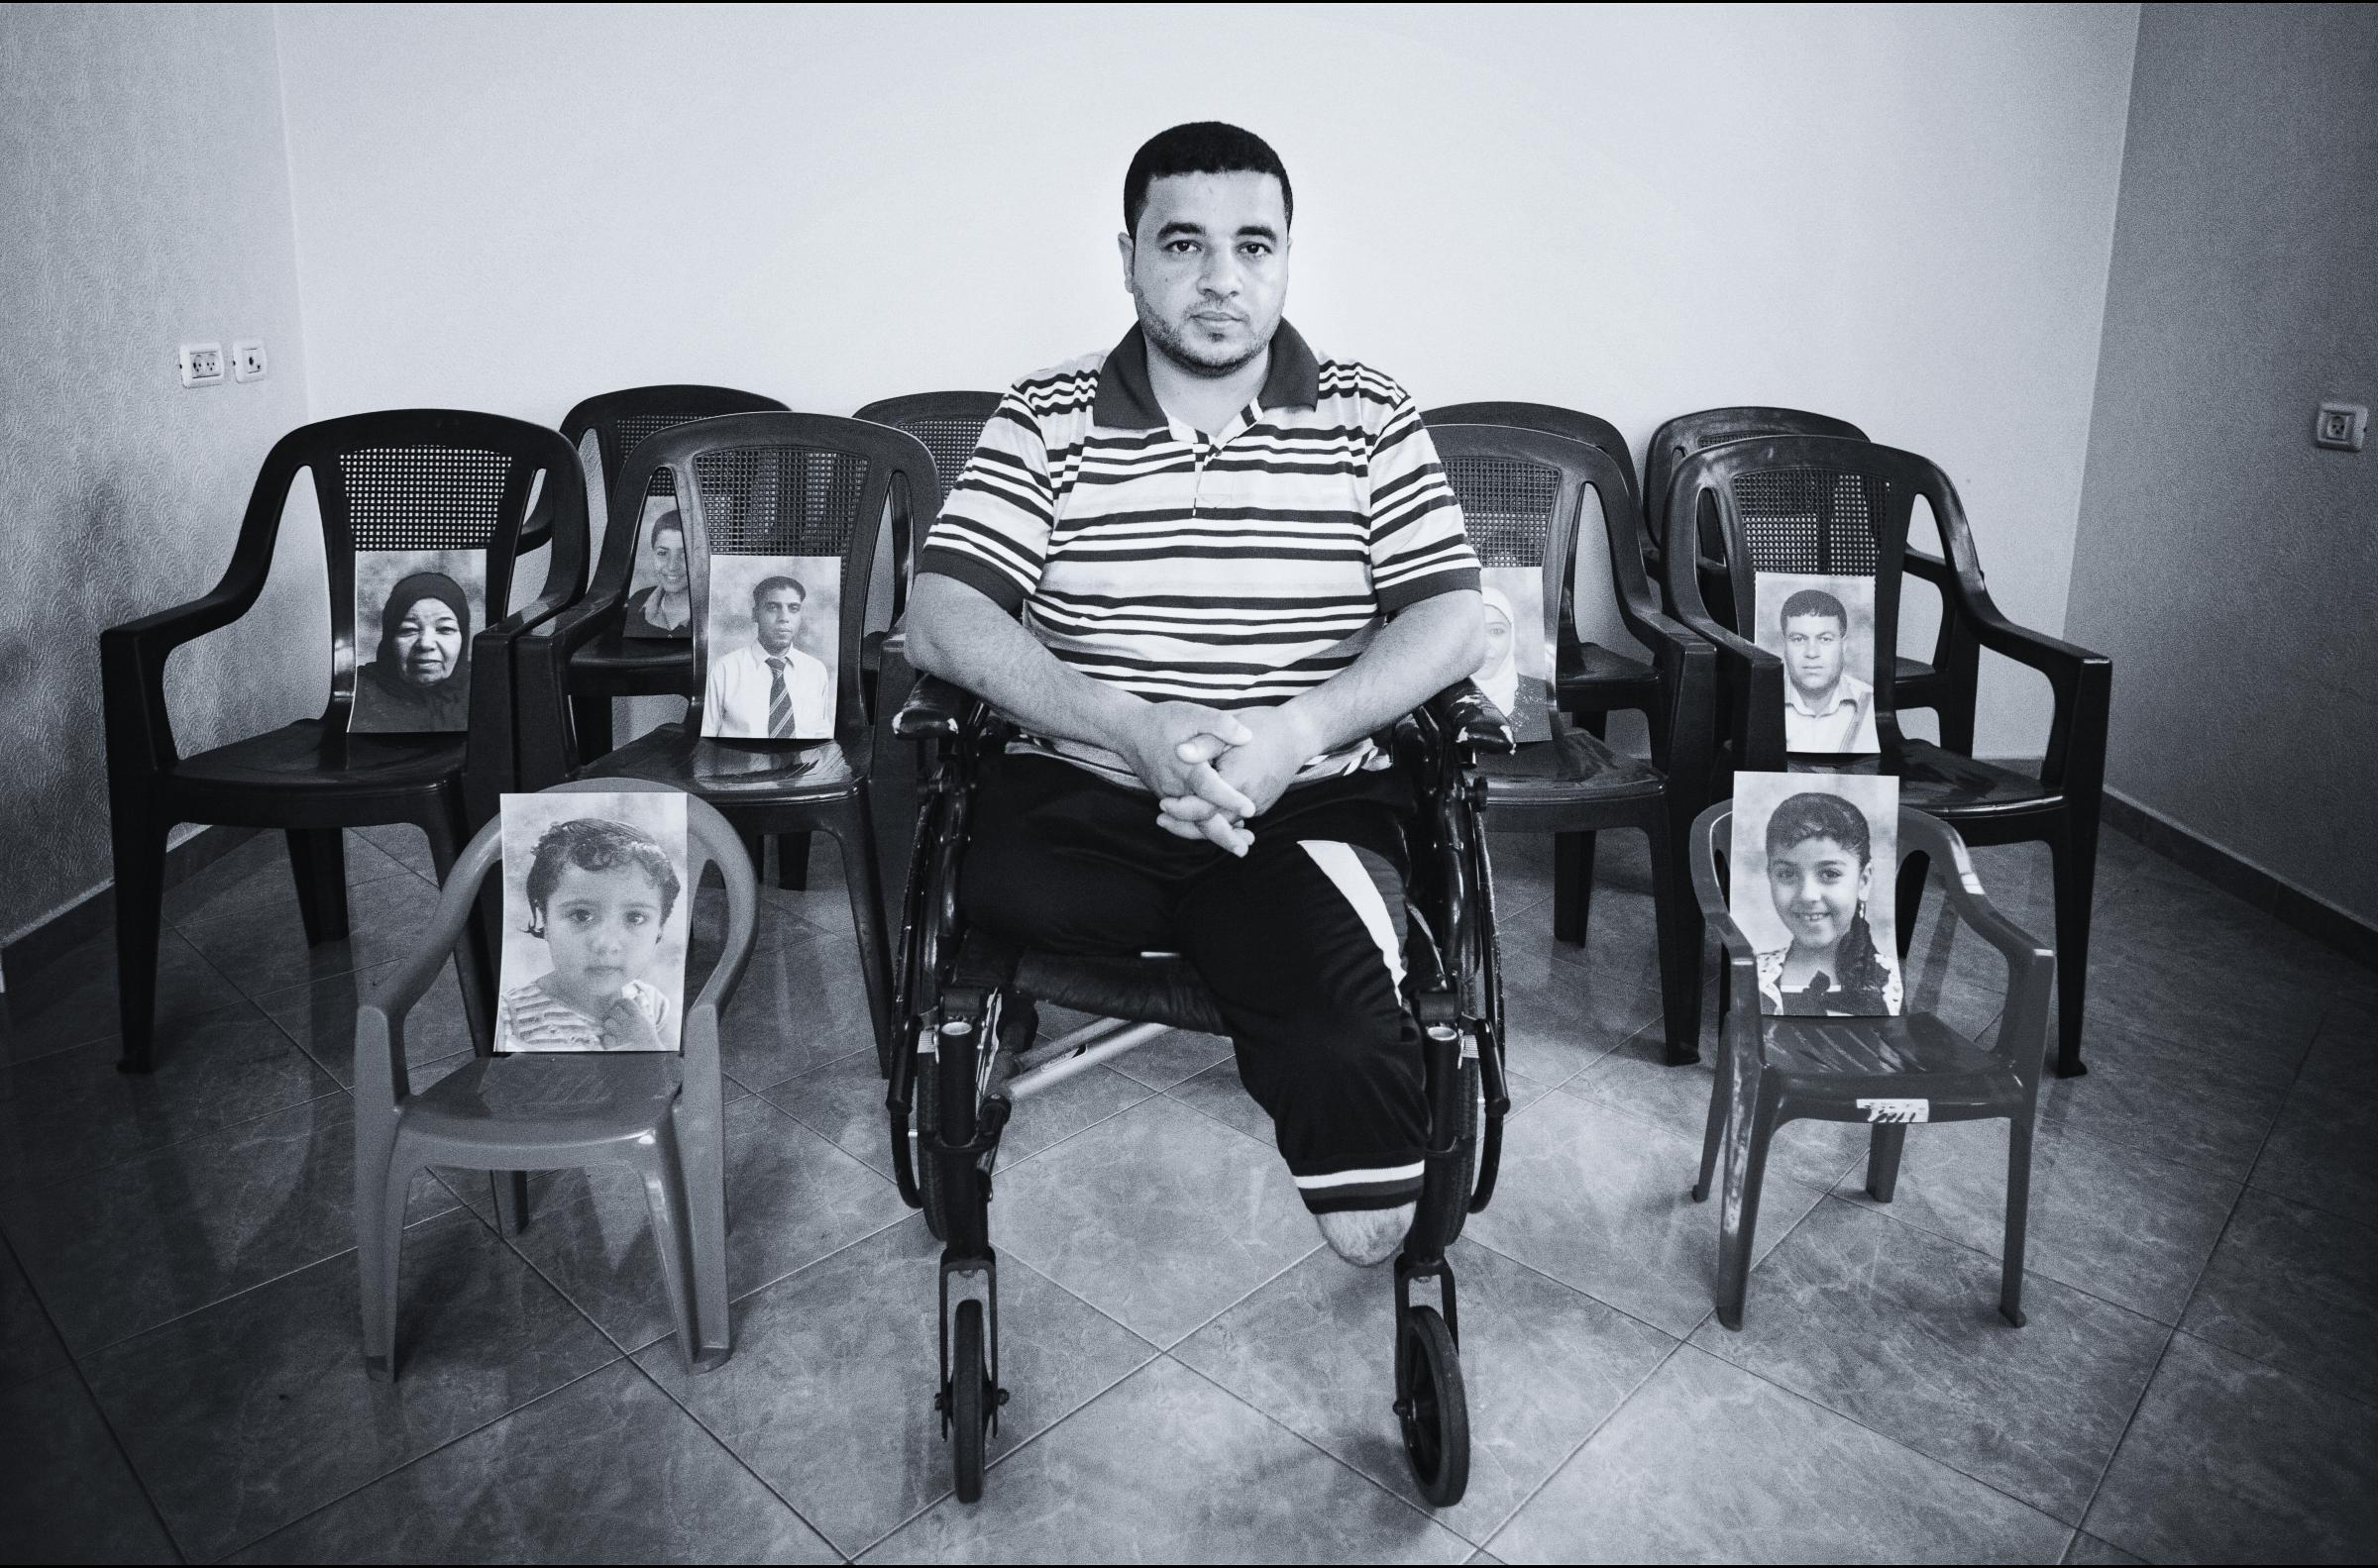  Ziad Deeb, Gaza War 2008-2009 : &ldquo;I couldn&rsquo;t hear, see or speak. I just blinked, and 12 members of my family were shattered...